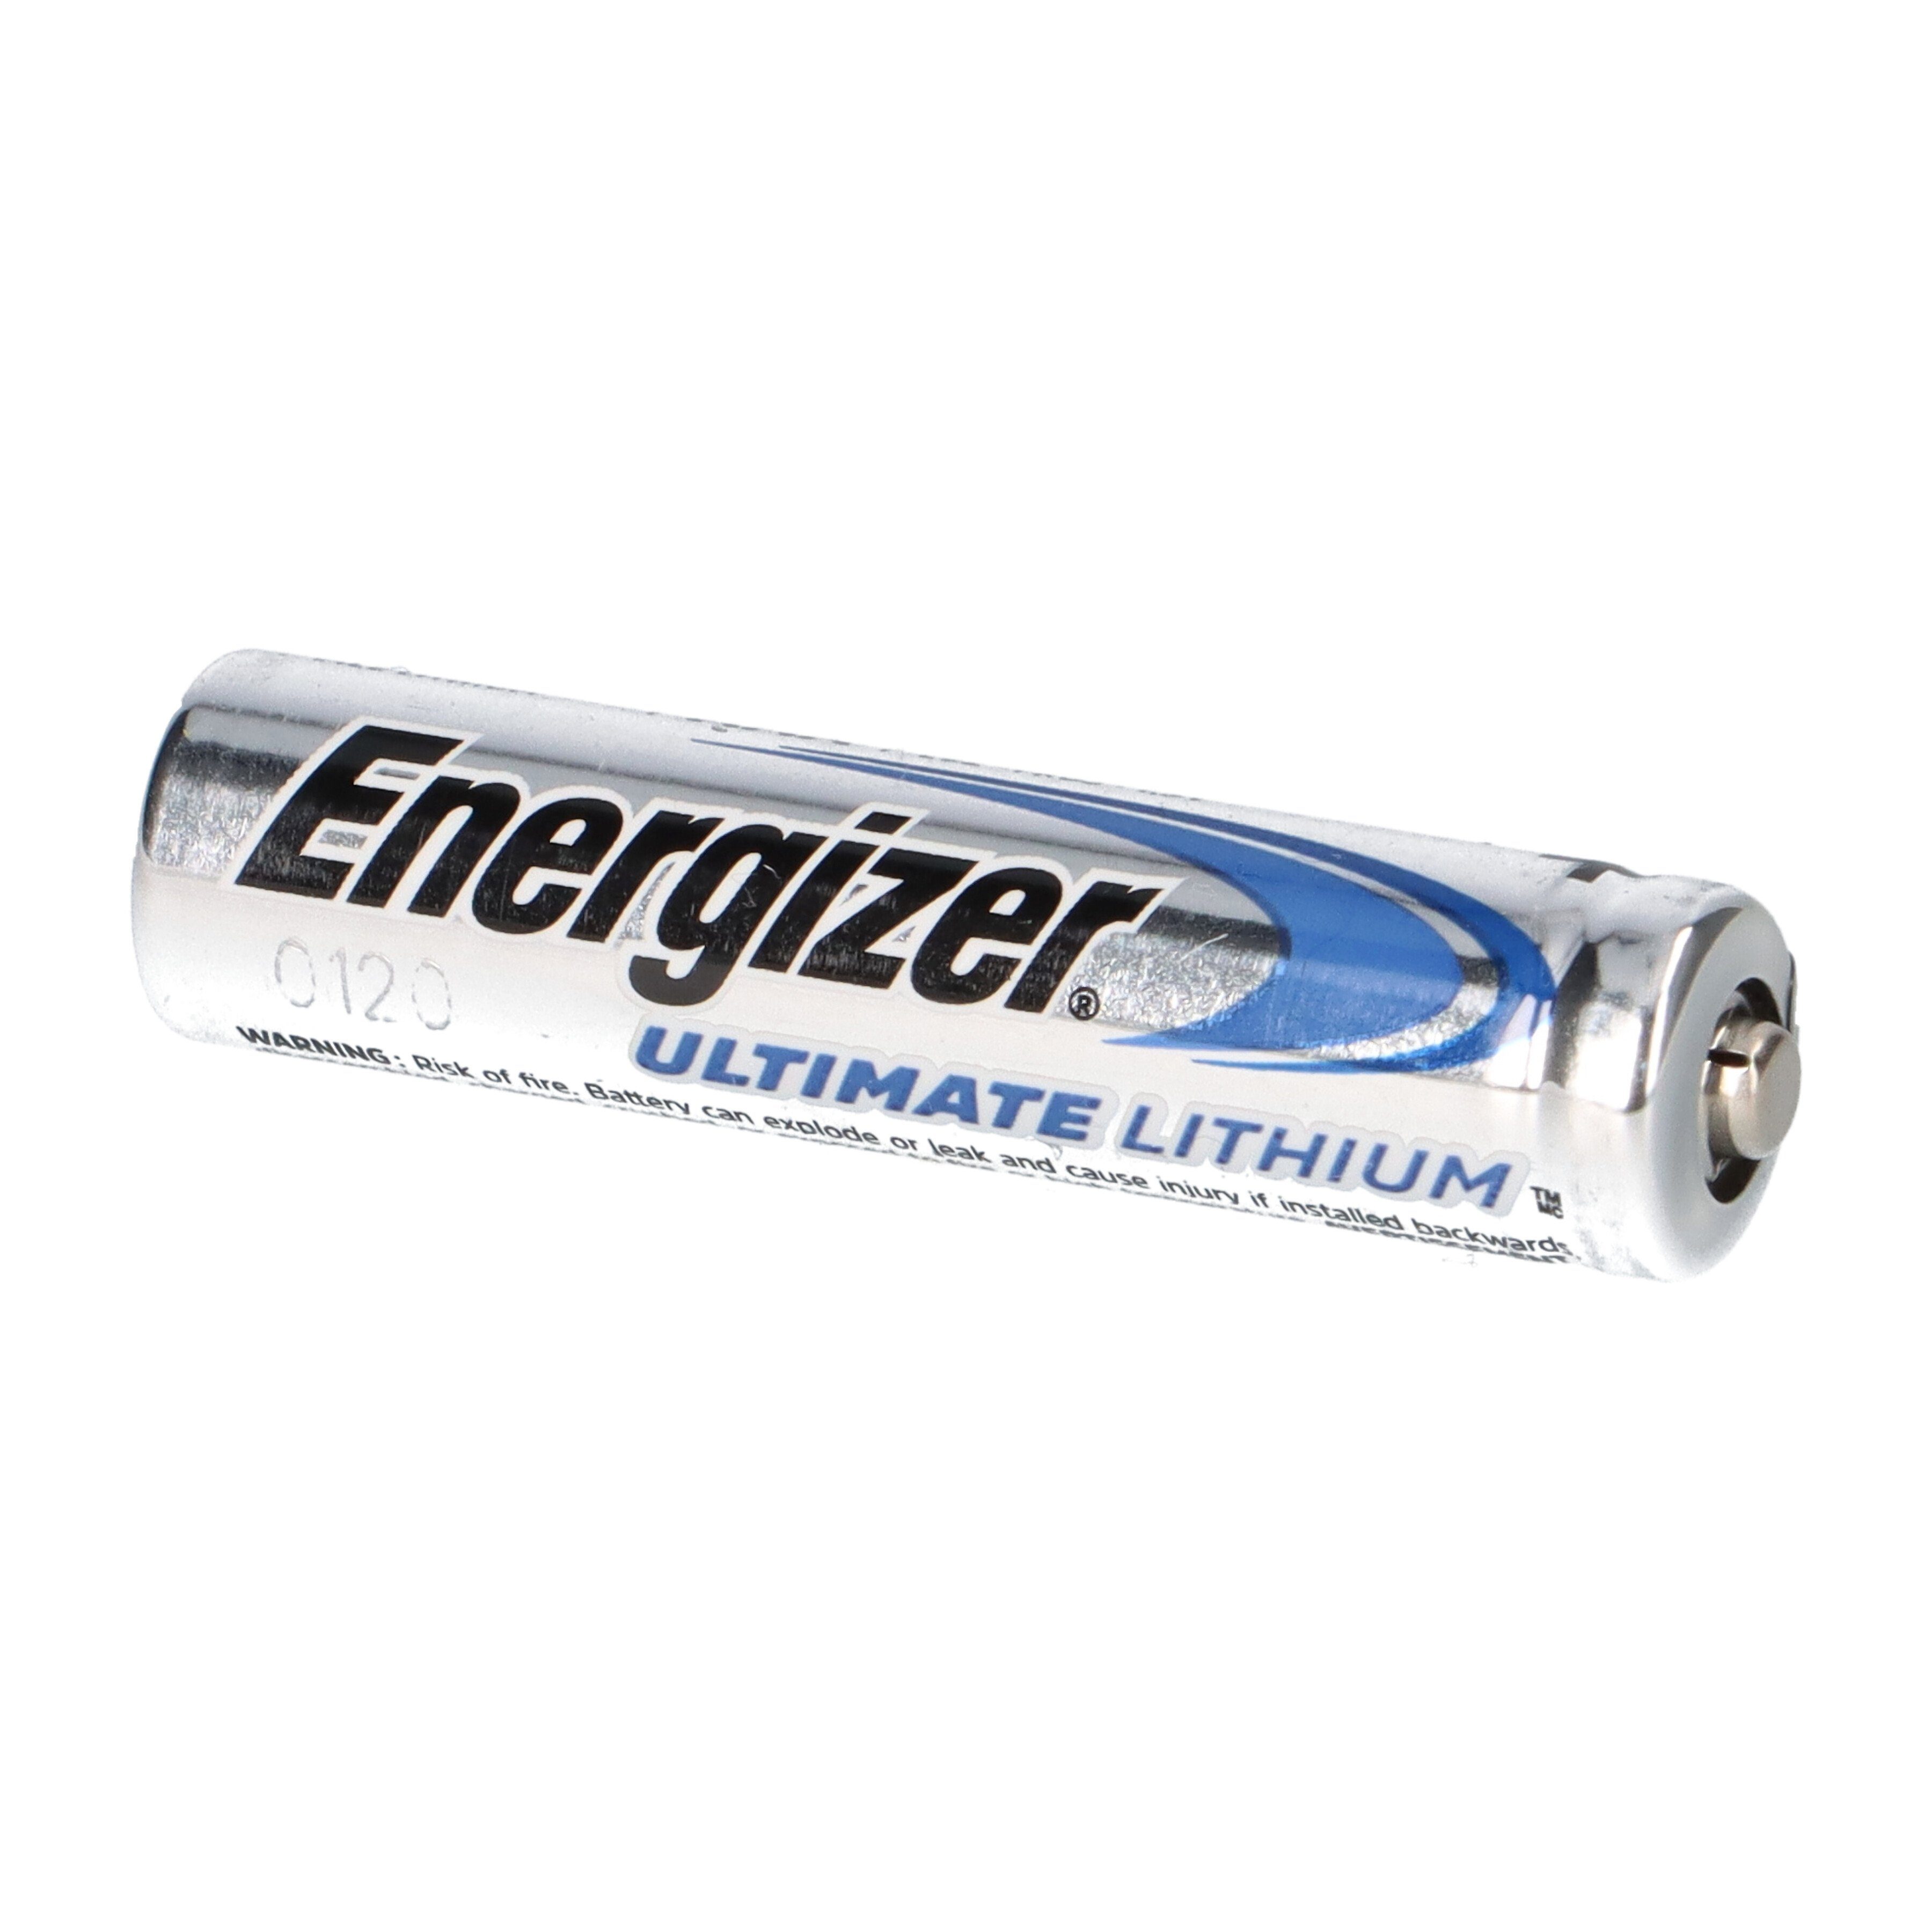 1.5V Energizer 20x Ultimate Batterie L92 Energizer Micro AAA Batterie Lithium LR03